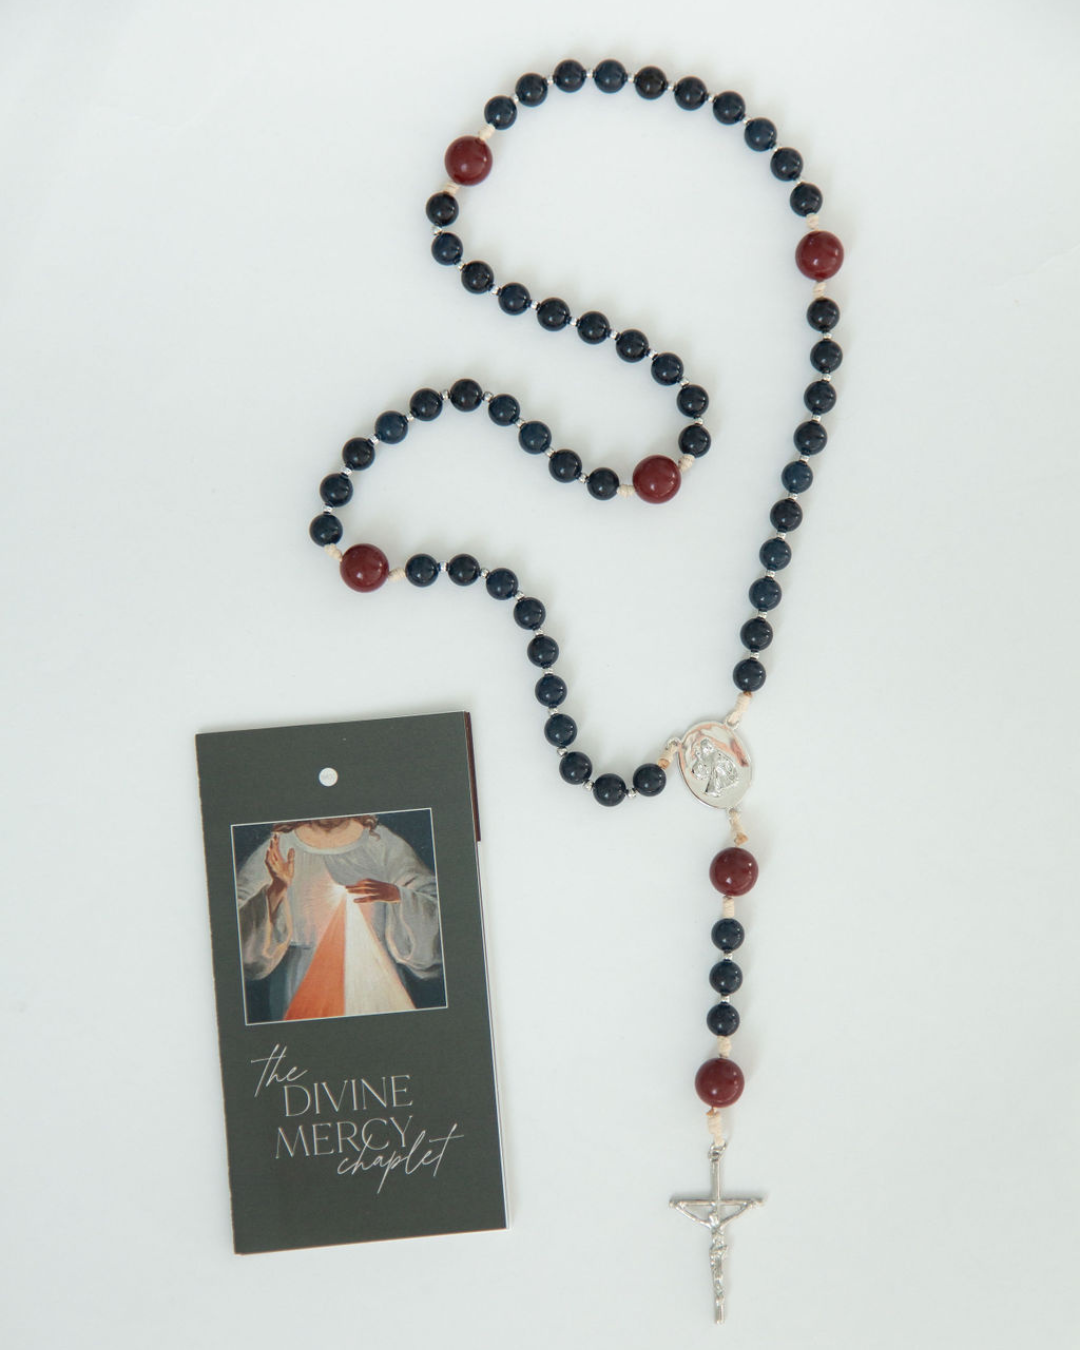 What is the Divine Mercy Chaplet?